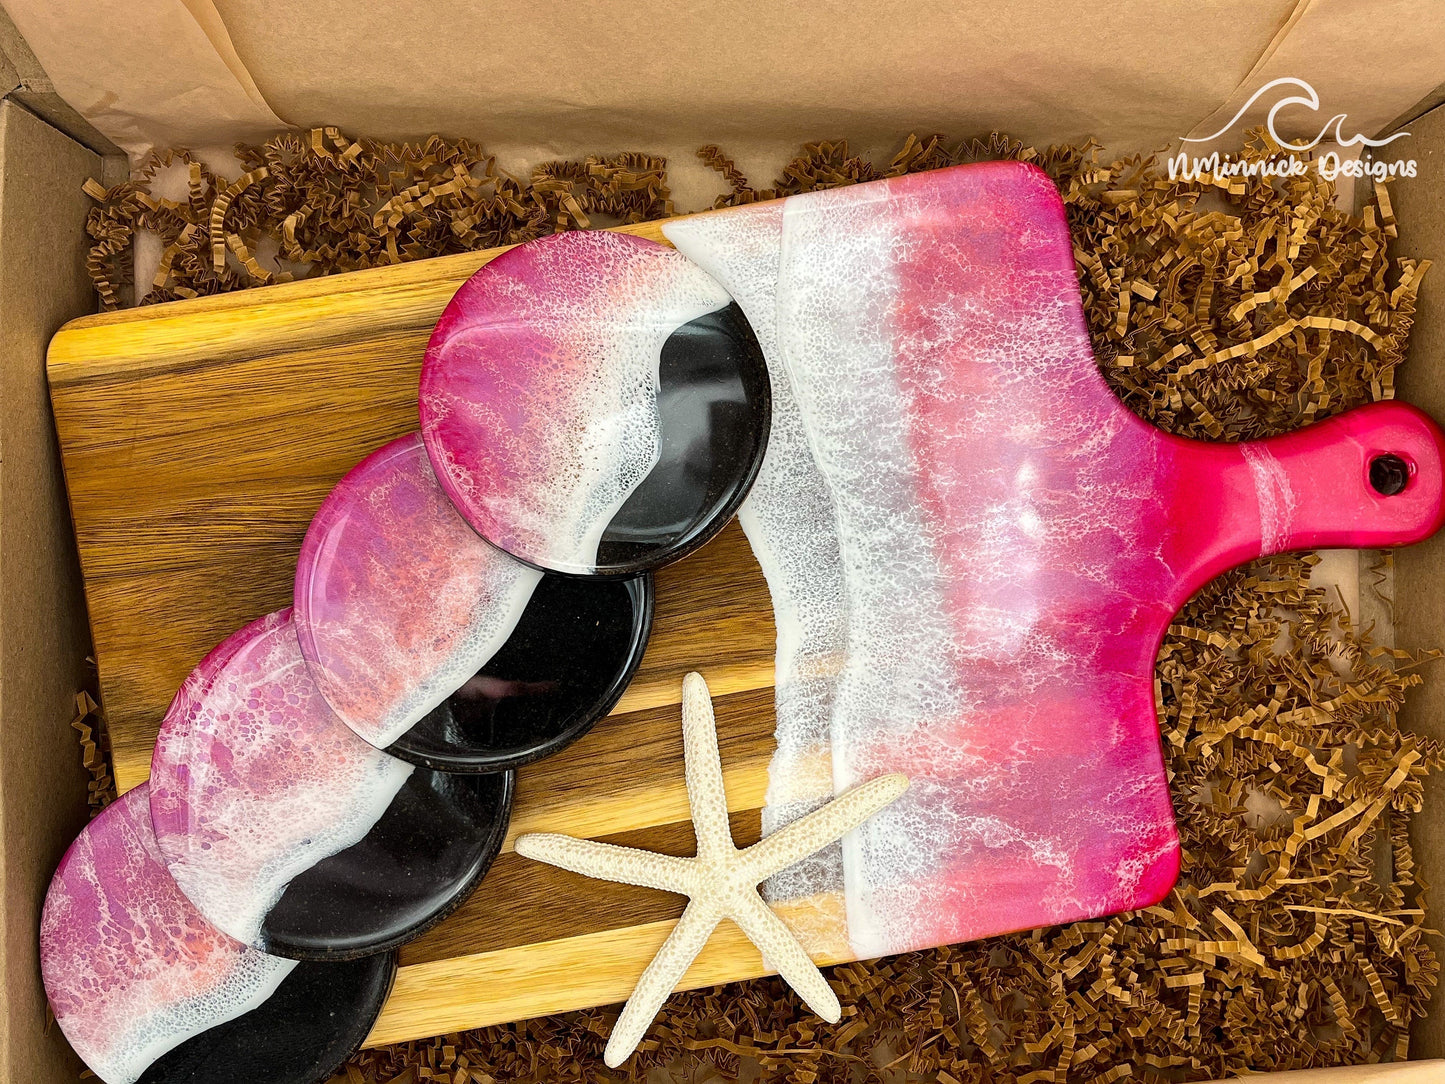 Acacia Wood Serving Board with handle. Top portion covered in red and pink ocean resin art resembling waves of the ocean. Matching set of 4 ocean resin drink coasters with real black sand and epoxy resin ocean and cork backings. Laying on a tan beach towel with a natural starfish (not included).